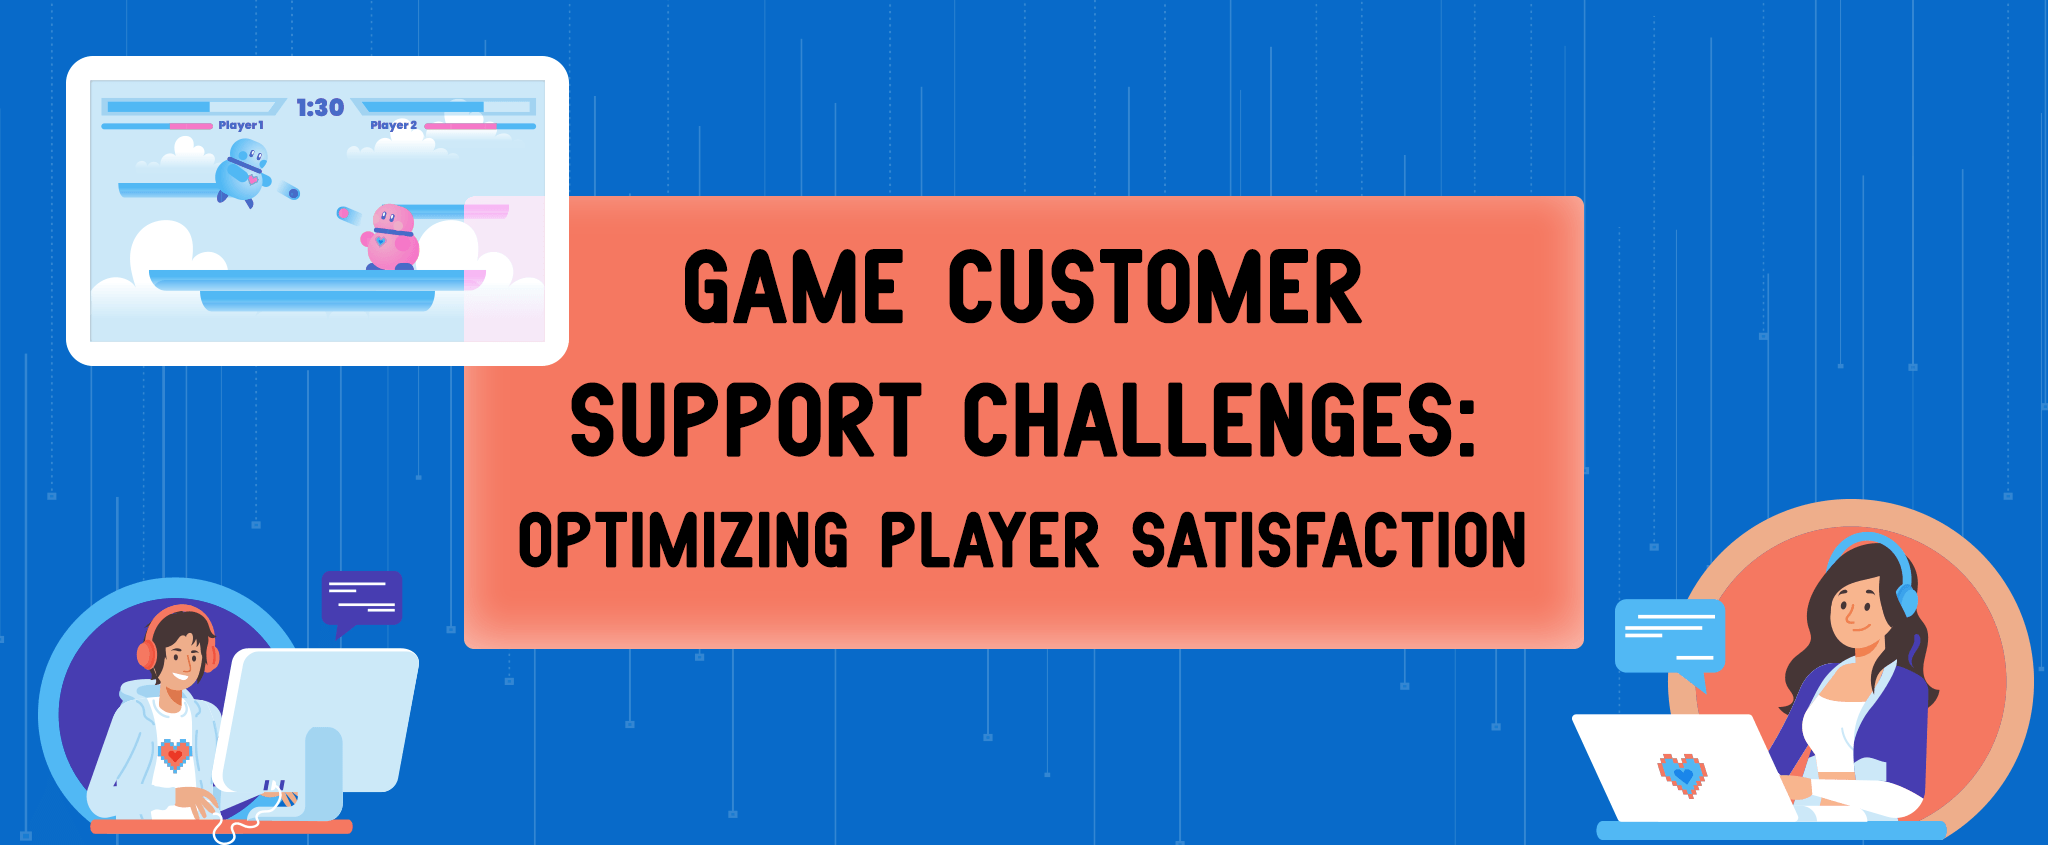 Game Customer Support Challenges: Optimizing Player Satisfaction